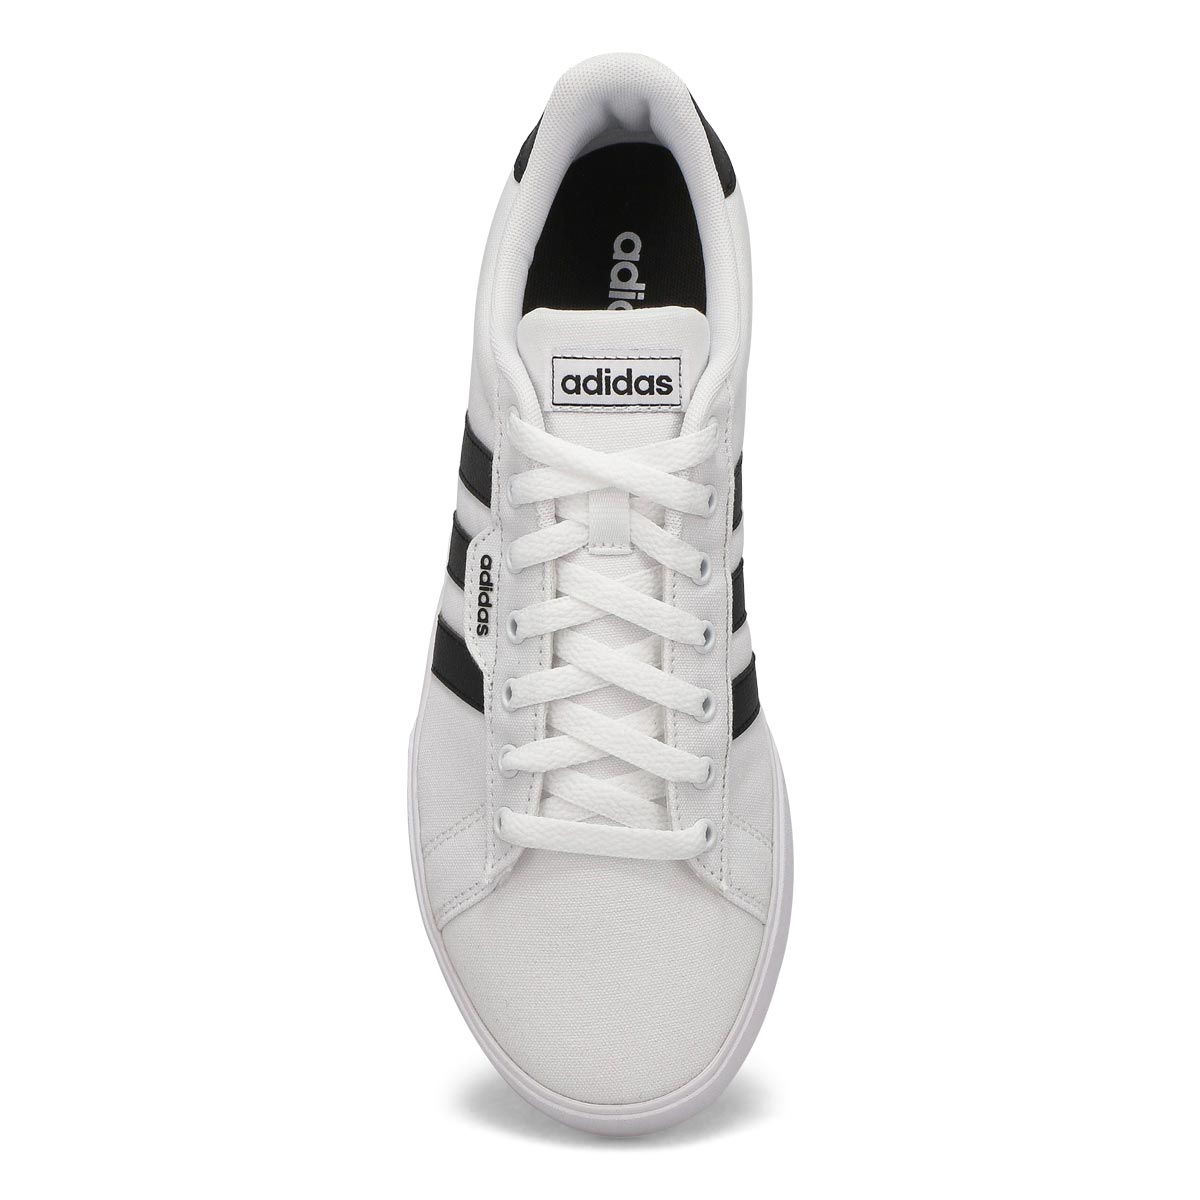 Men's Daily 3.0 Lace Up Sneaker - White/Black